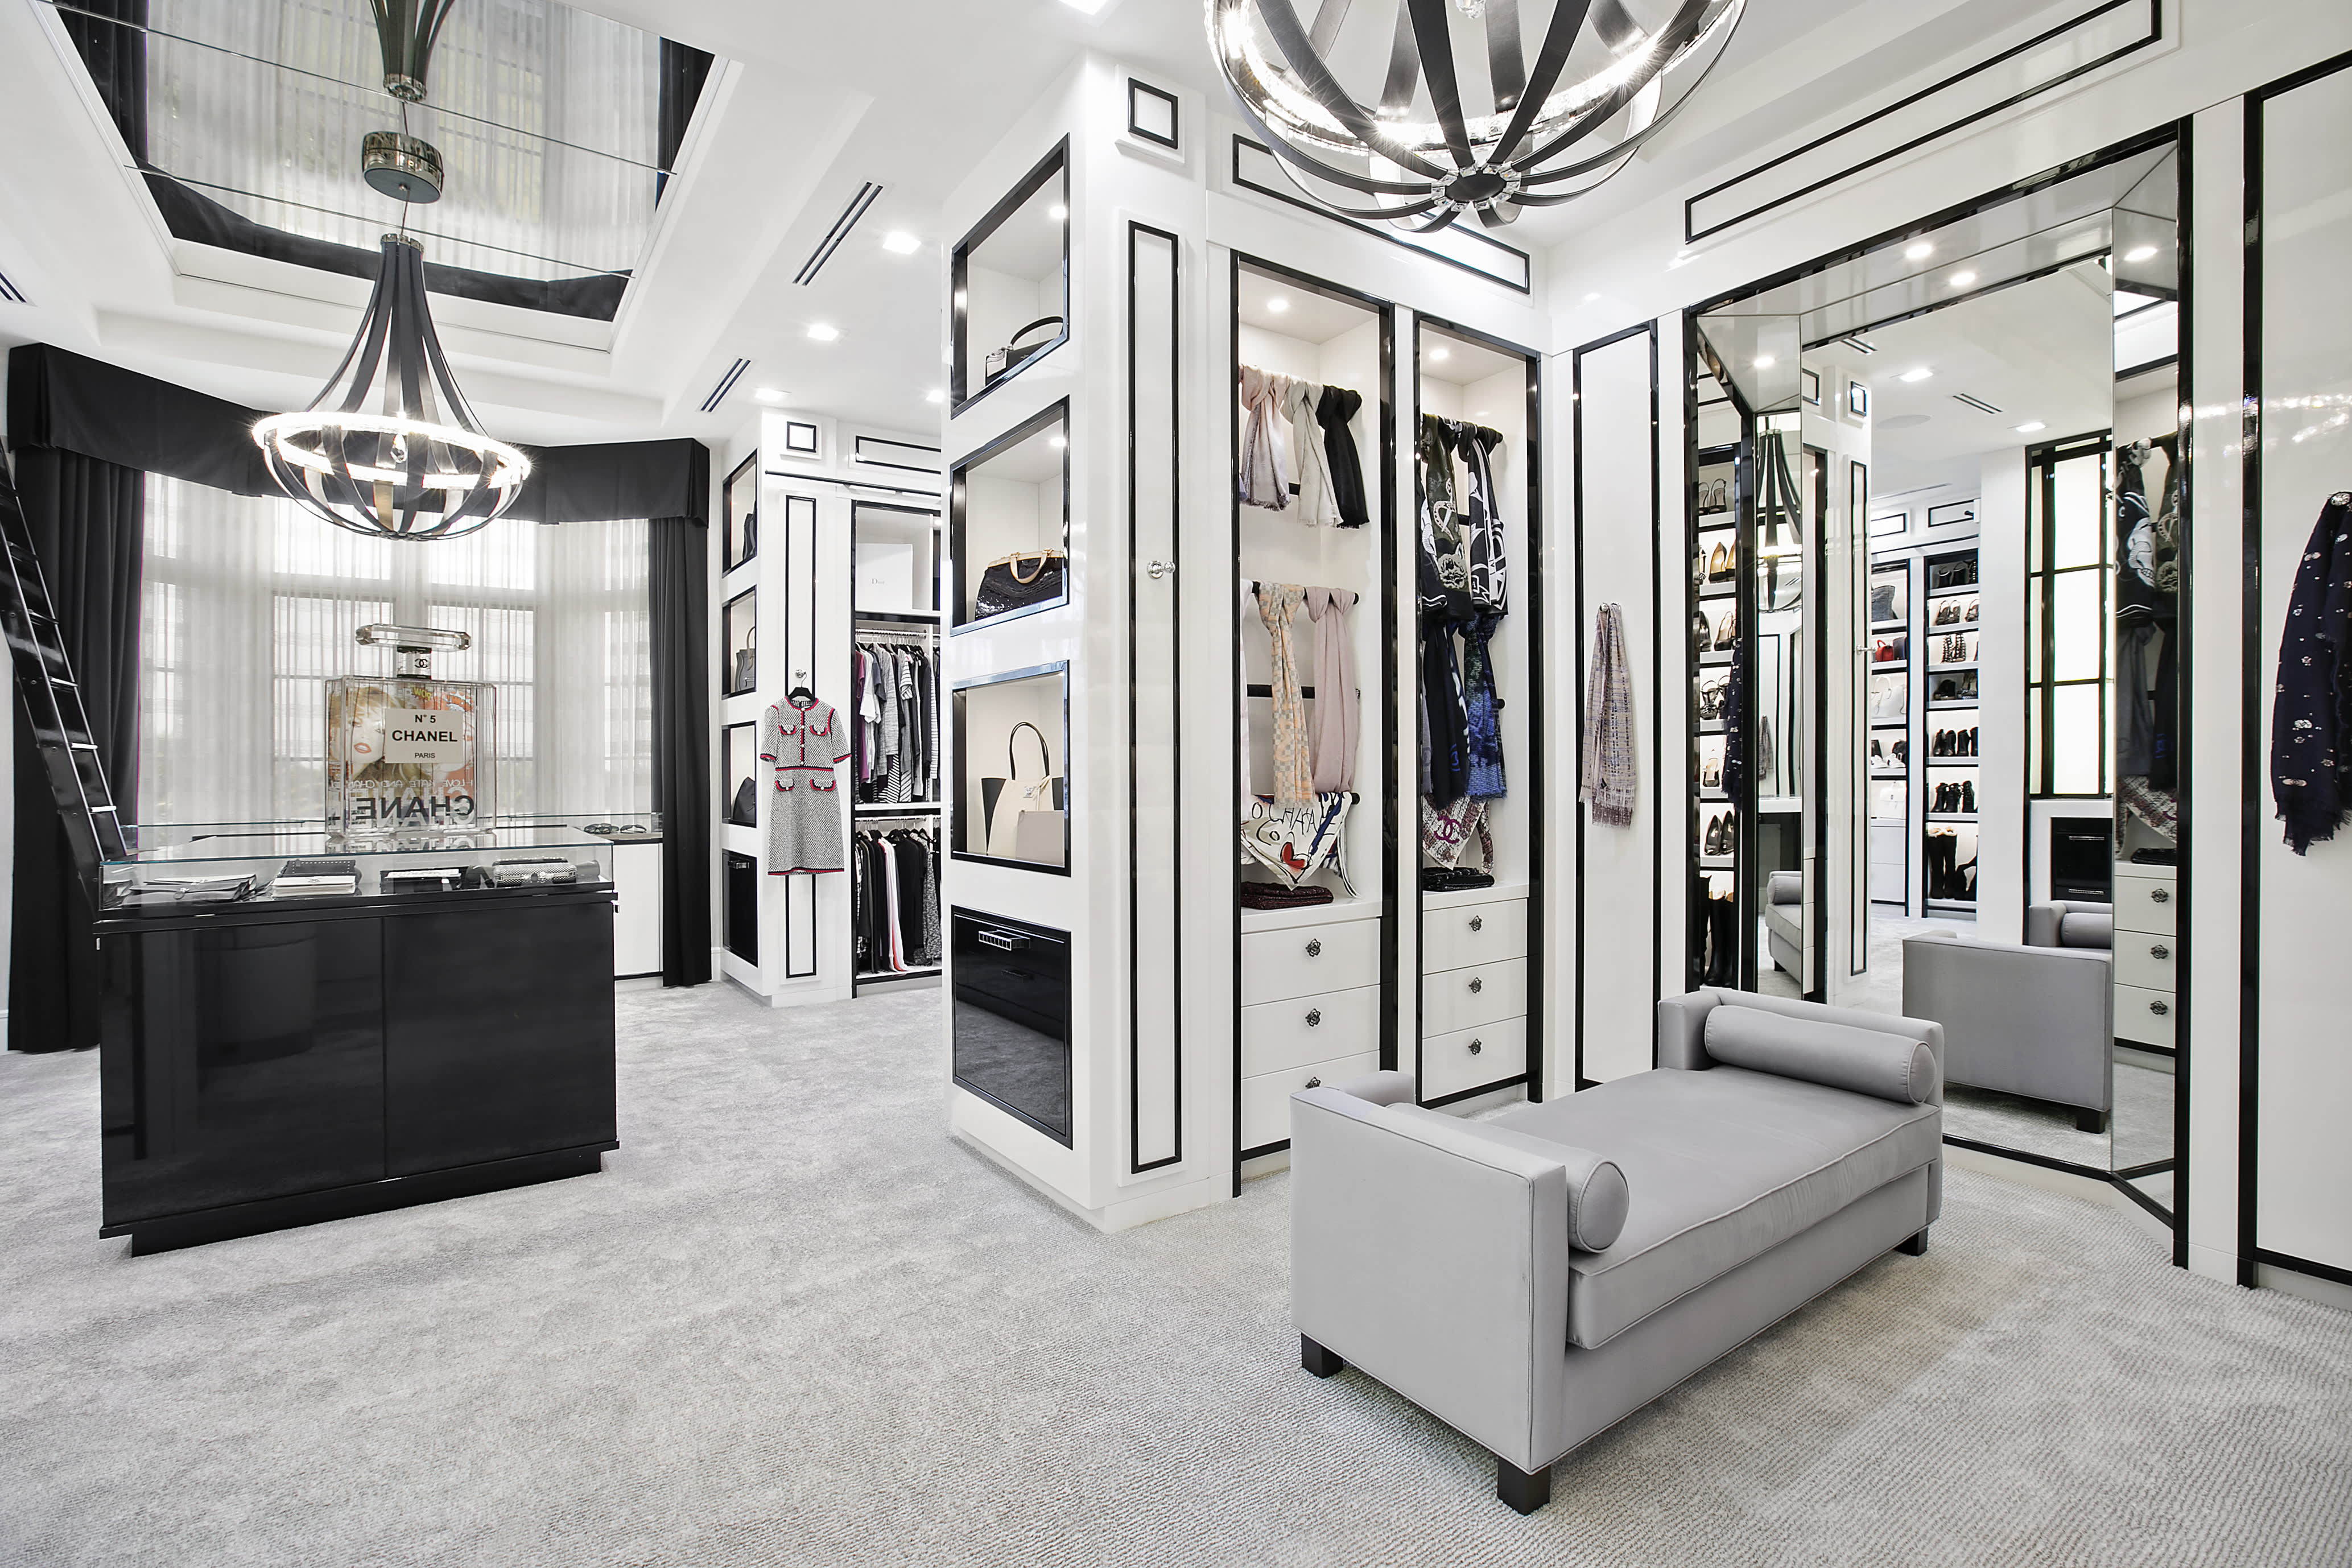 20 of the Most Over-the-Top Celebrity Closets